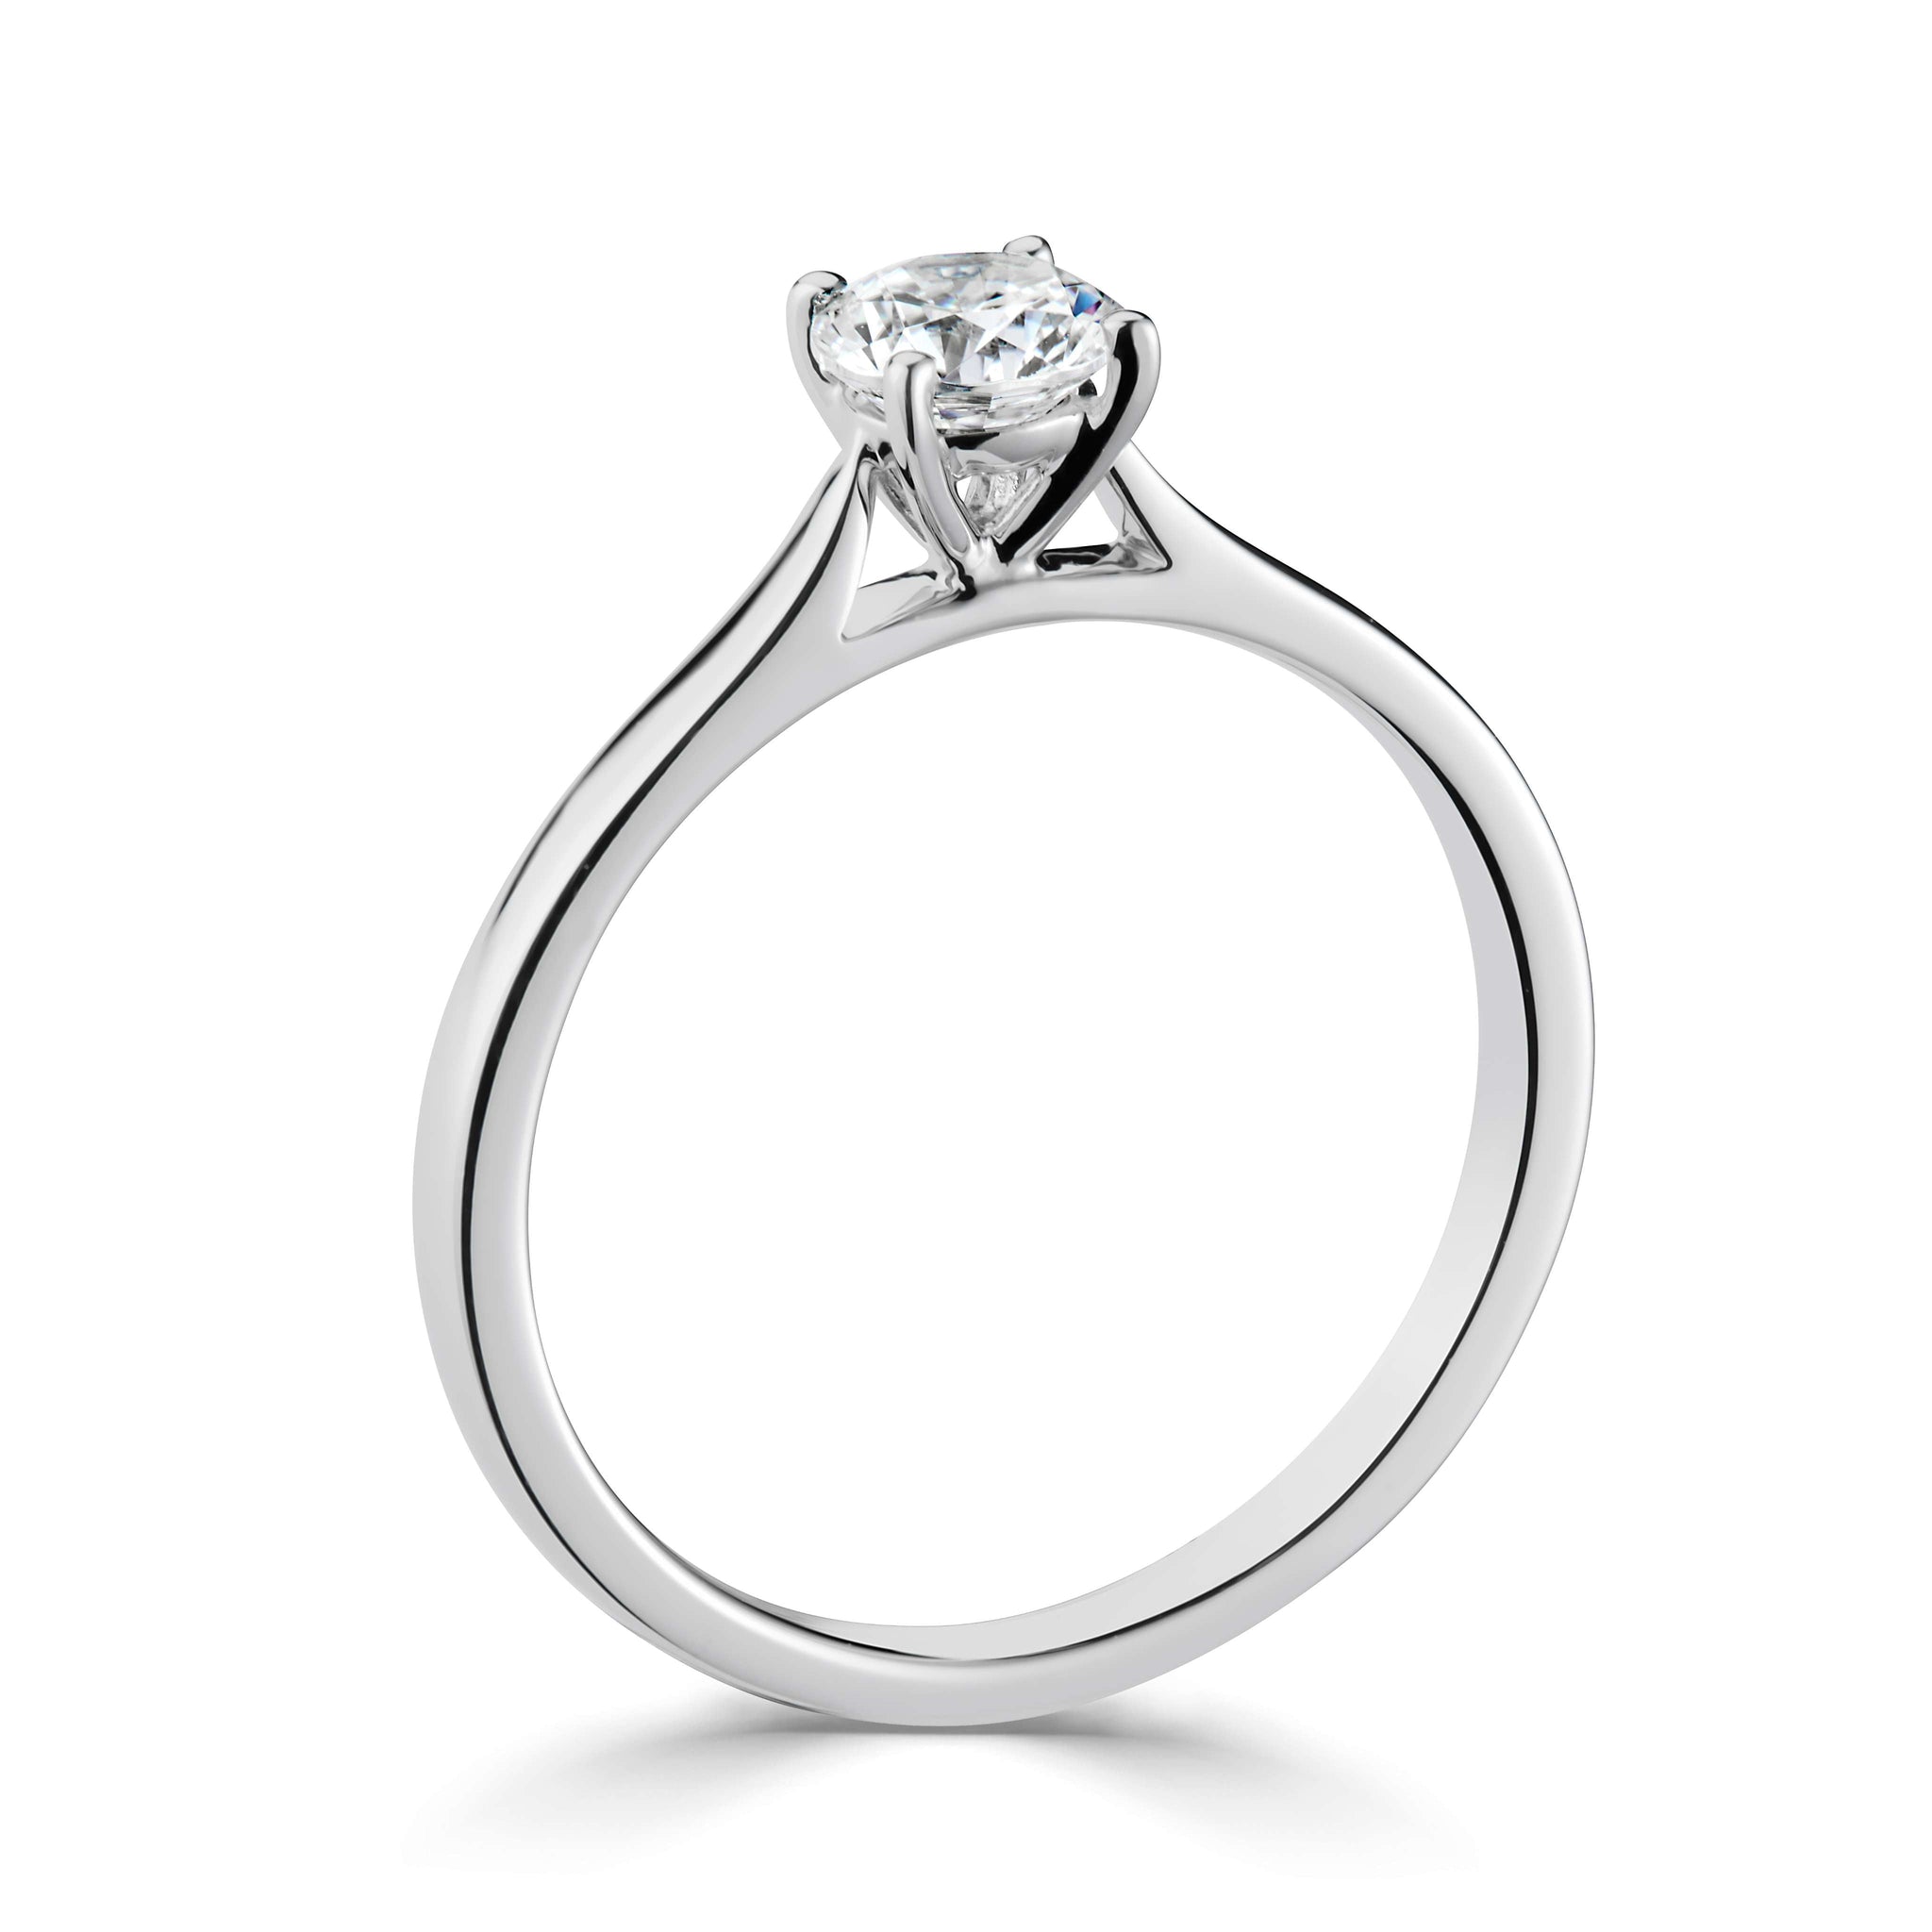 Annalise *Select a Round Diamond 0.25ct or above